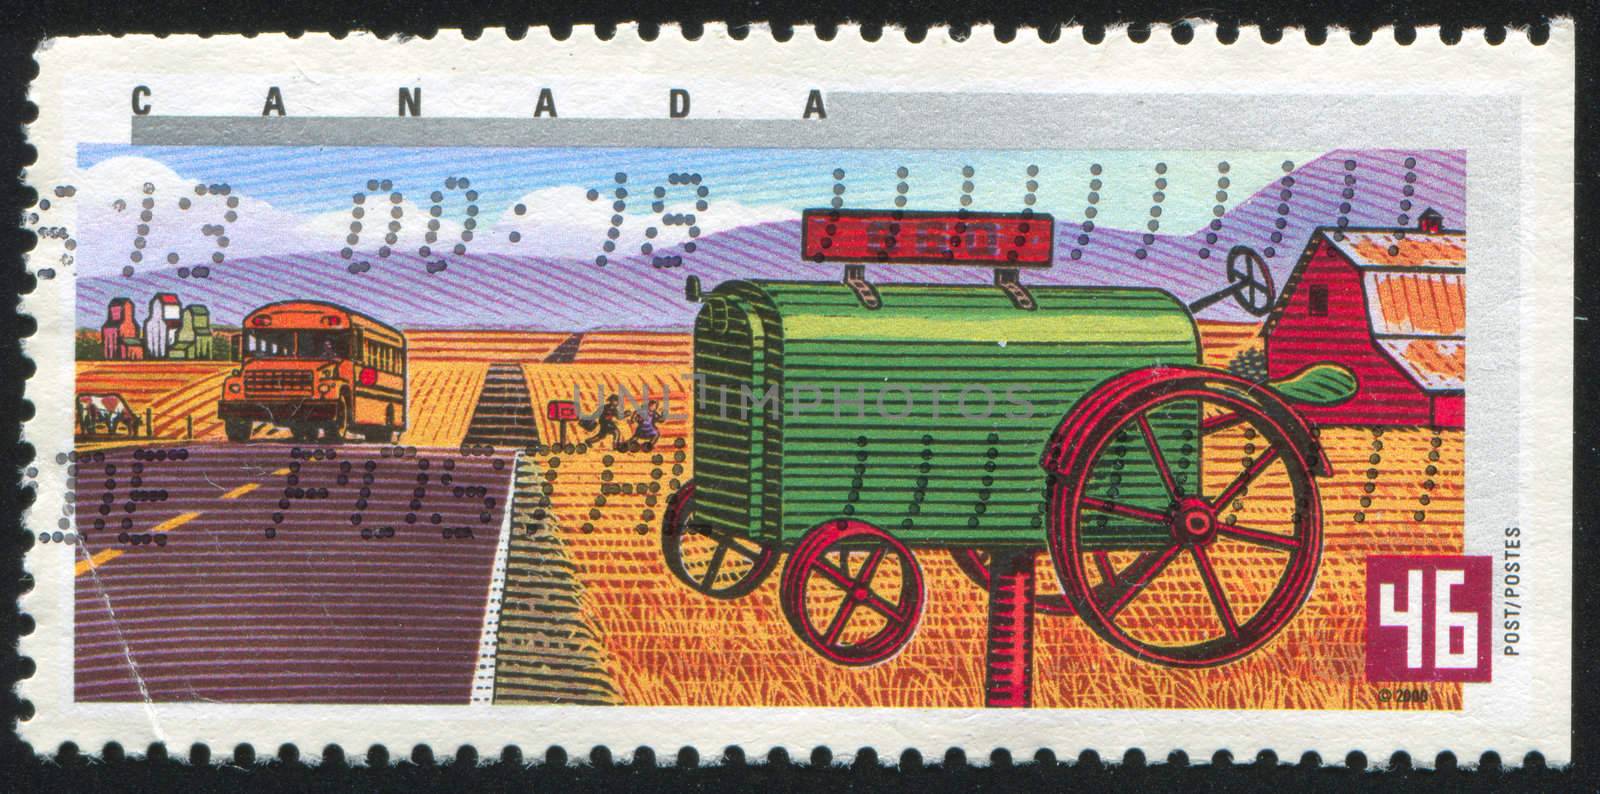 CANADA - CIRCA 2000: stamp printed by Canada, shows Decorated Rural Mailboxes, Tractor Design,  circa 2000